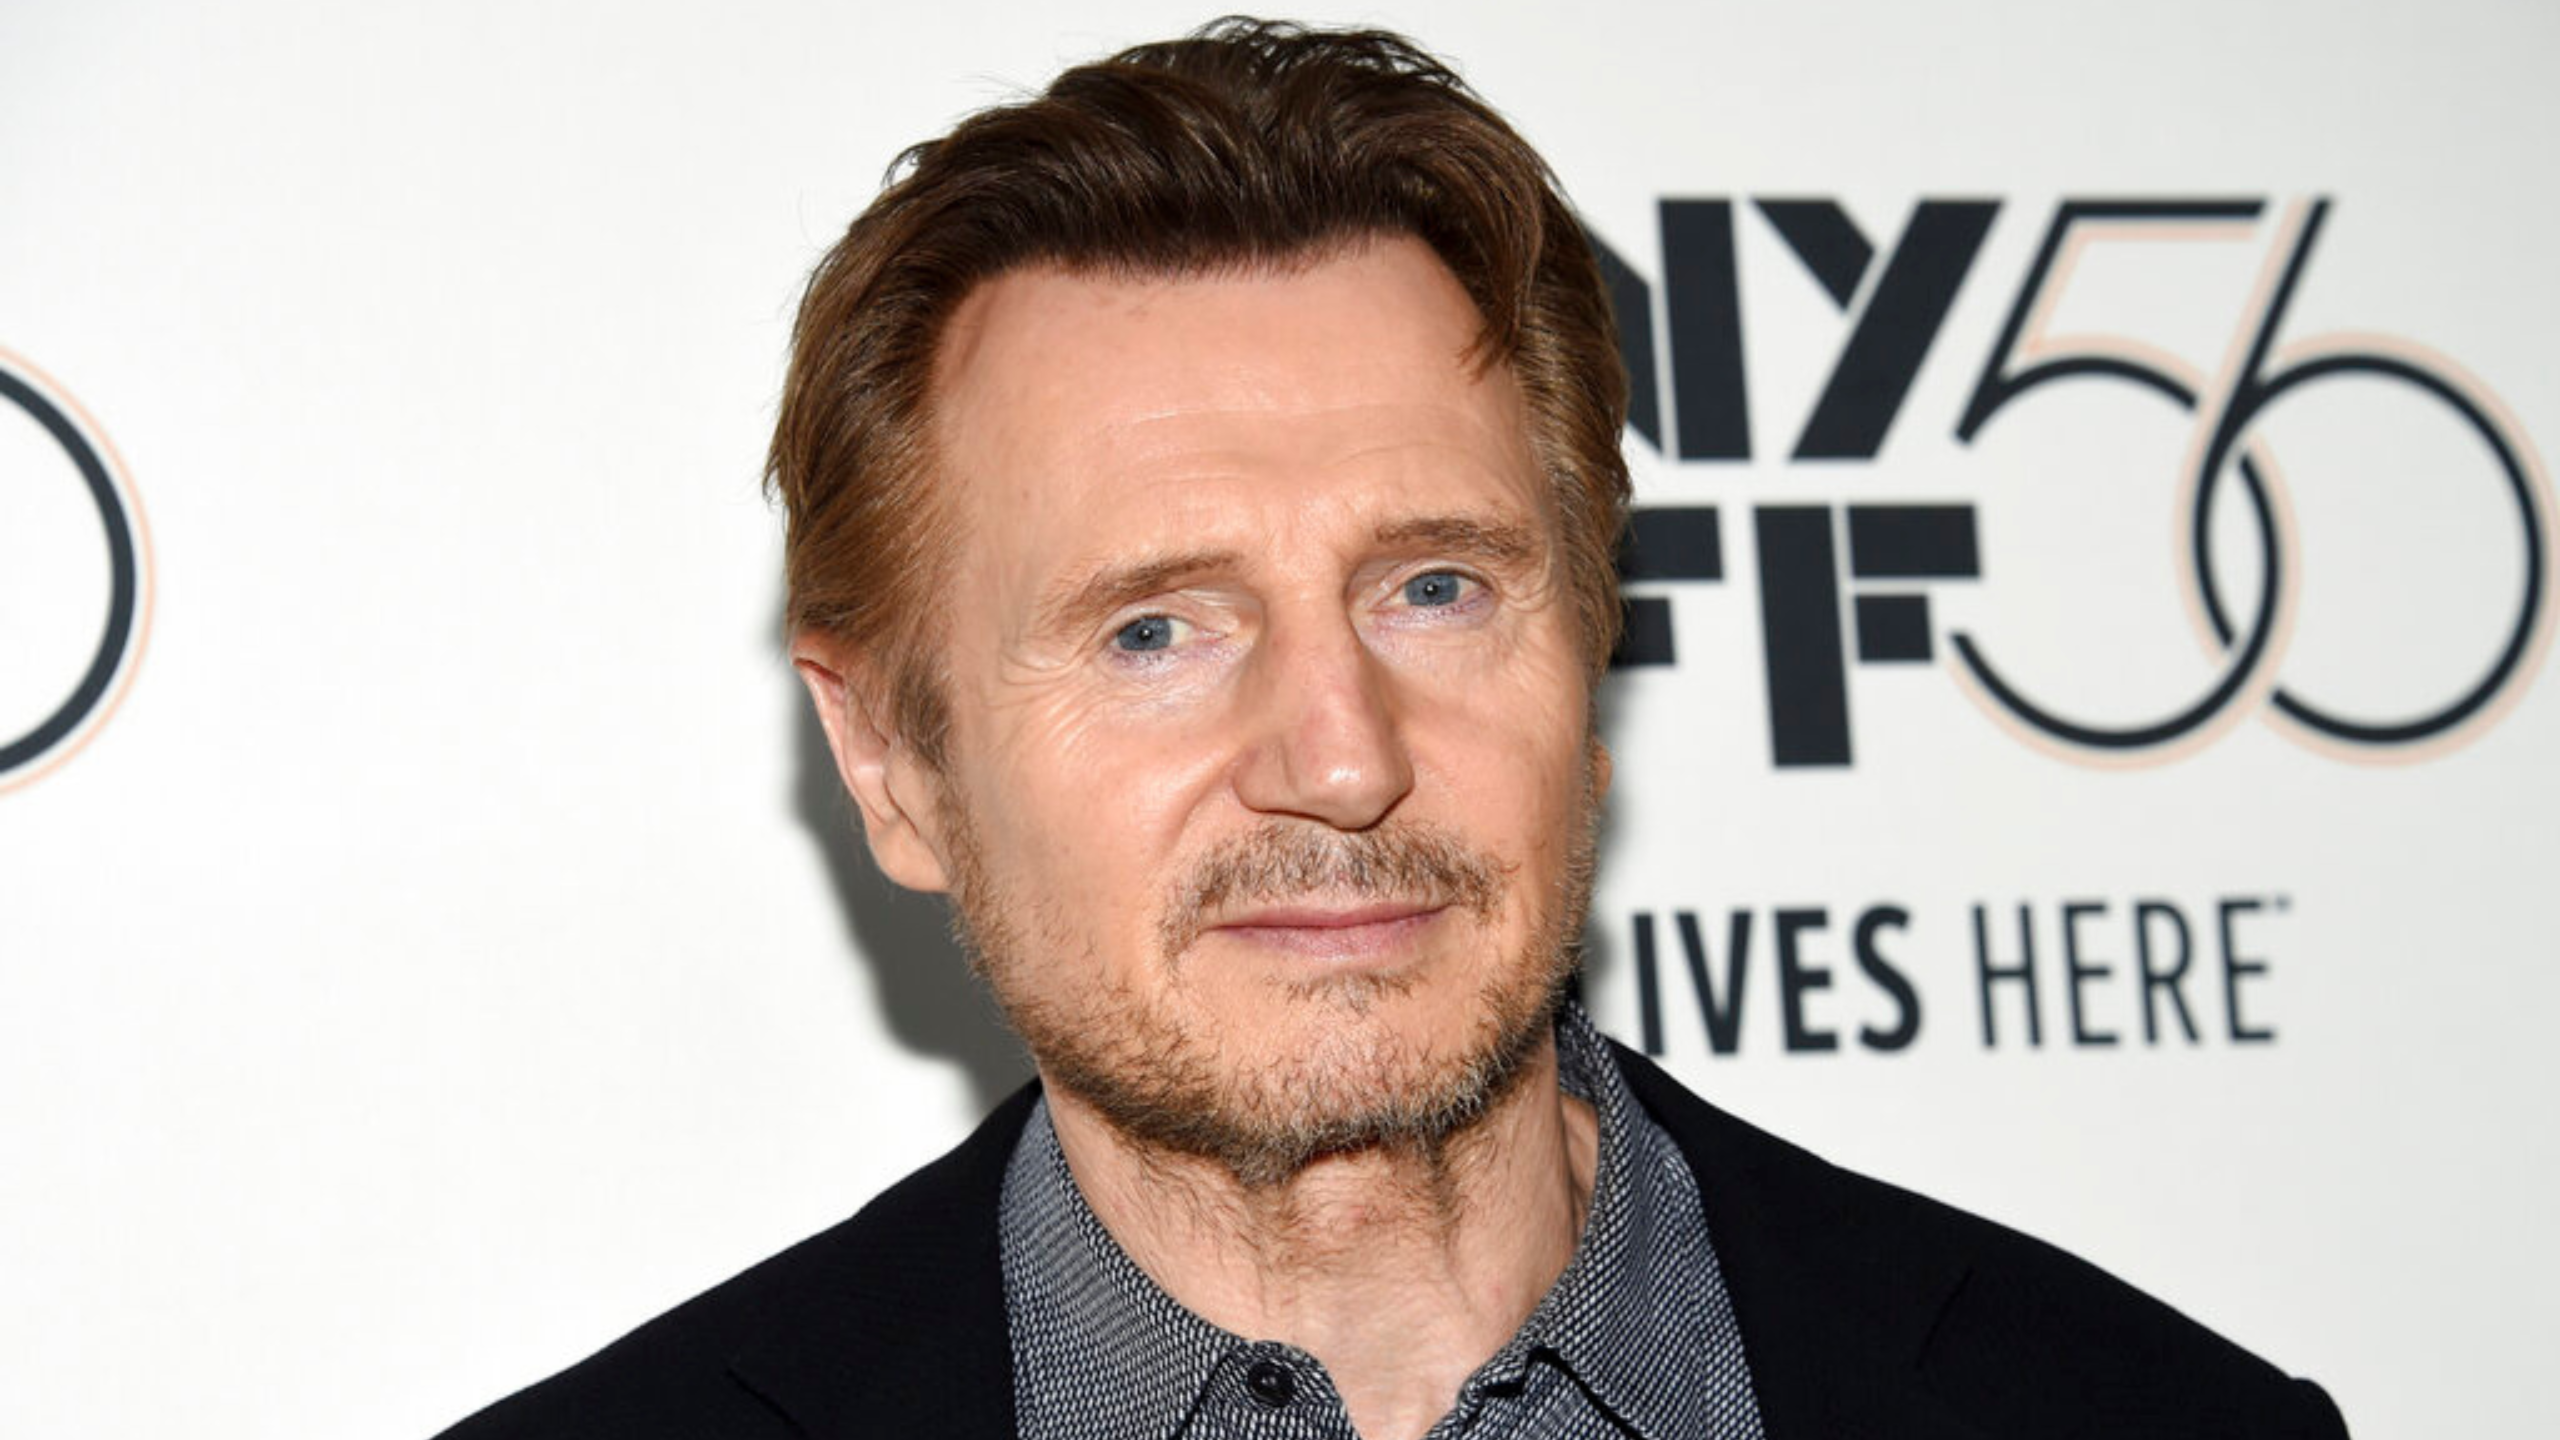 Star Wars Star Liam Neeson Says Spinoffs of Franchise Are Taking ‘Away the Mystery and the Magic’